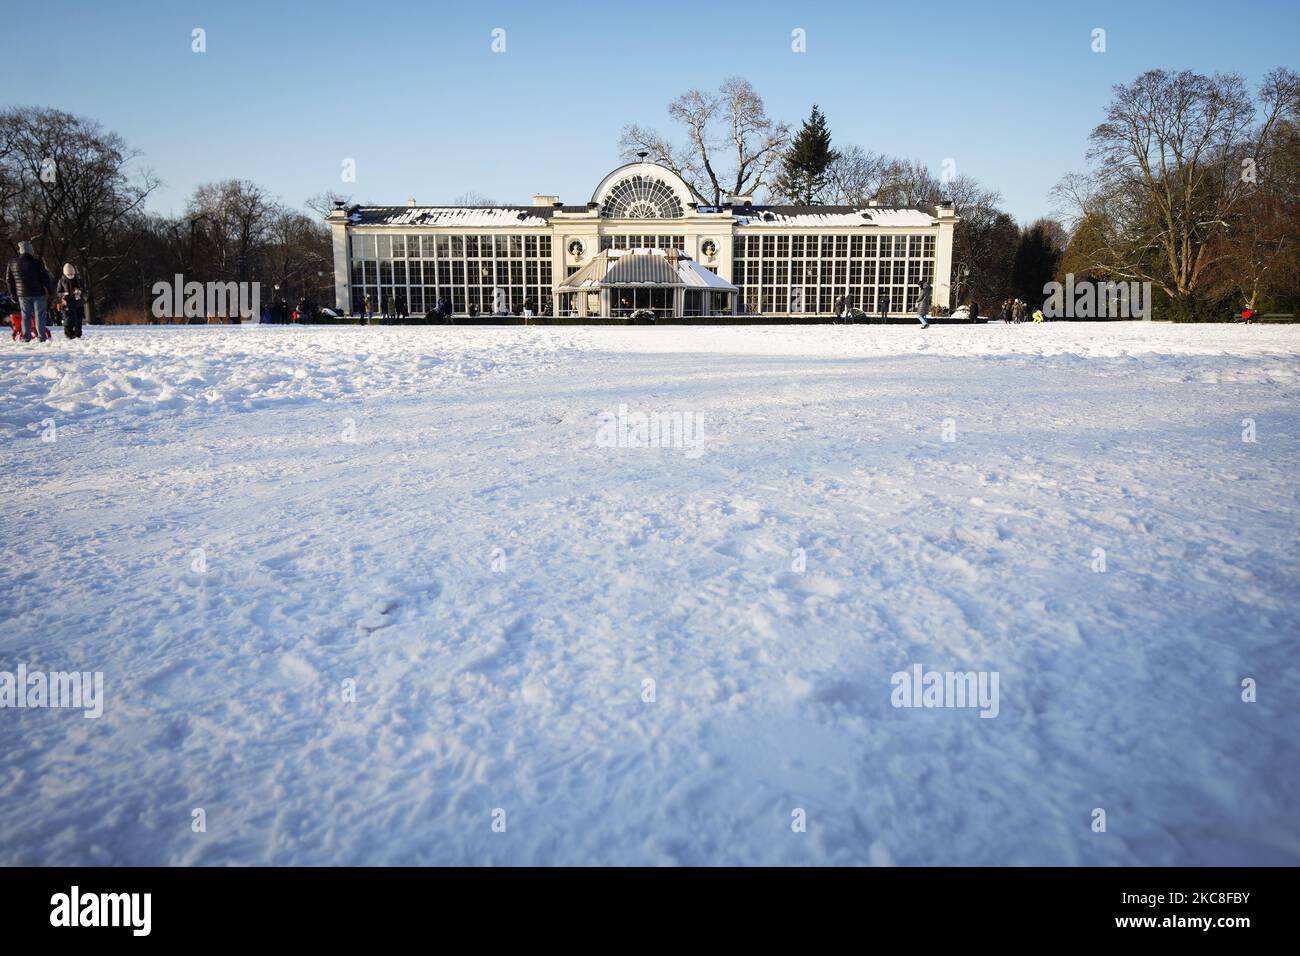 The Belvedere restaurant is seen in the Royal Baths Park in Warsaw, Poland on January 31, 2021. Recently online newspaper EUobserver revealed that in 2015 the EU border security agency Frontex spend 94 thousand Euros on an annual dinner party at the Belvedere restaurant. The agency's budget has increased by almost a hundredfold since in 2005 when it's funds totalled 6 million Euros compared to the current 500 million Euros. (Photo by Jaap Arriens/NurPhoto) Stock Photo